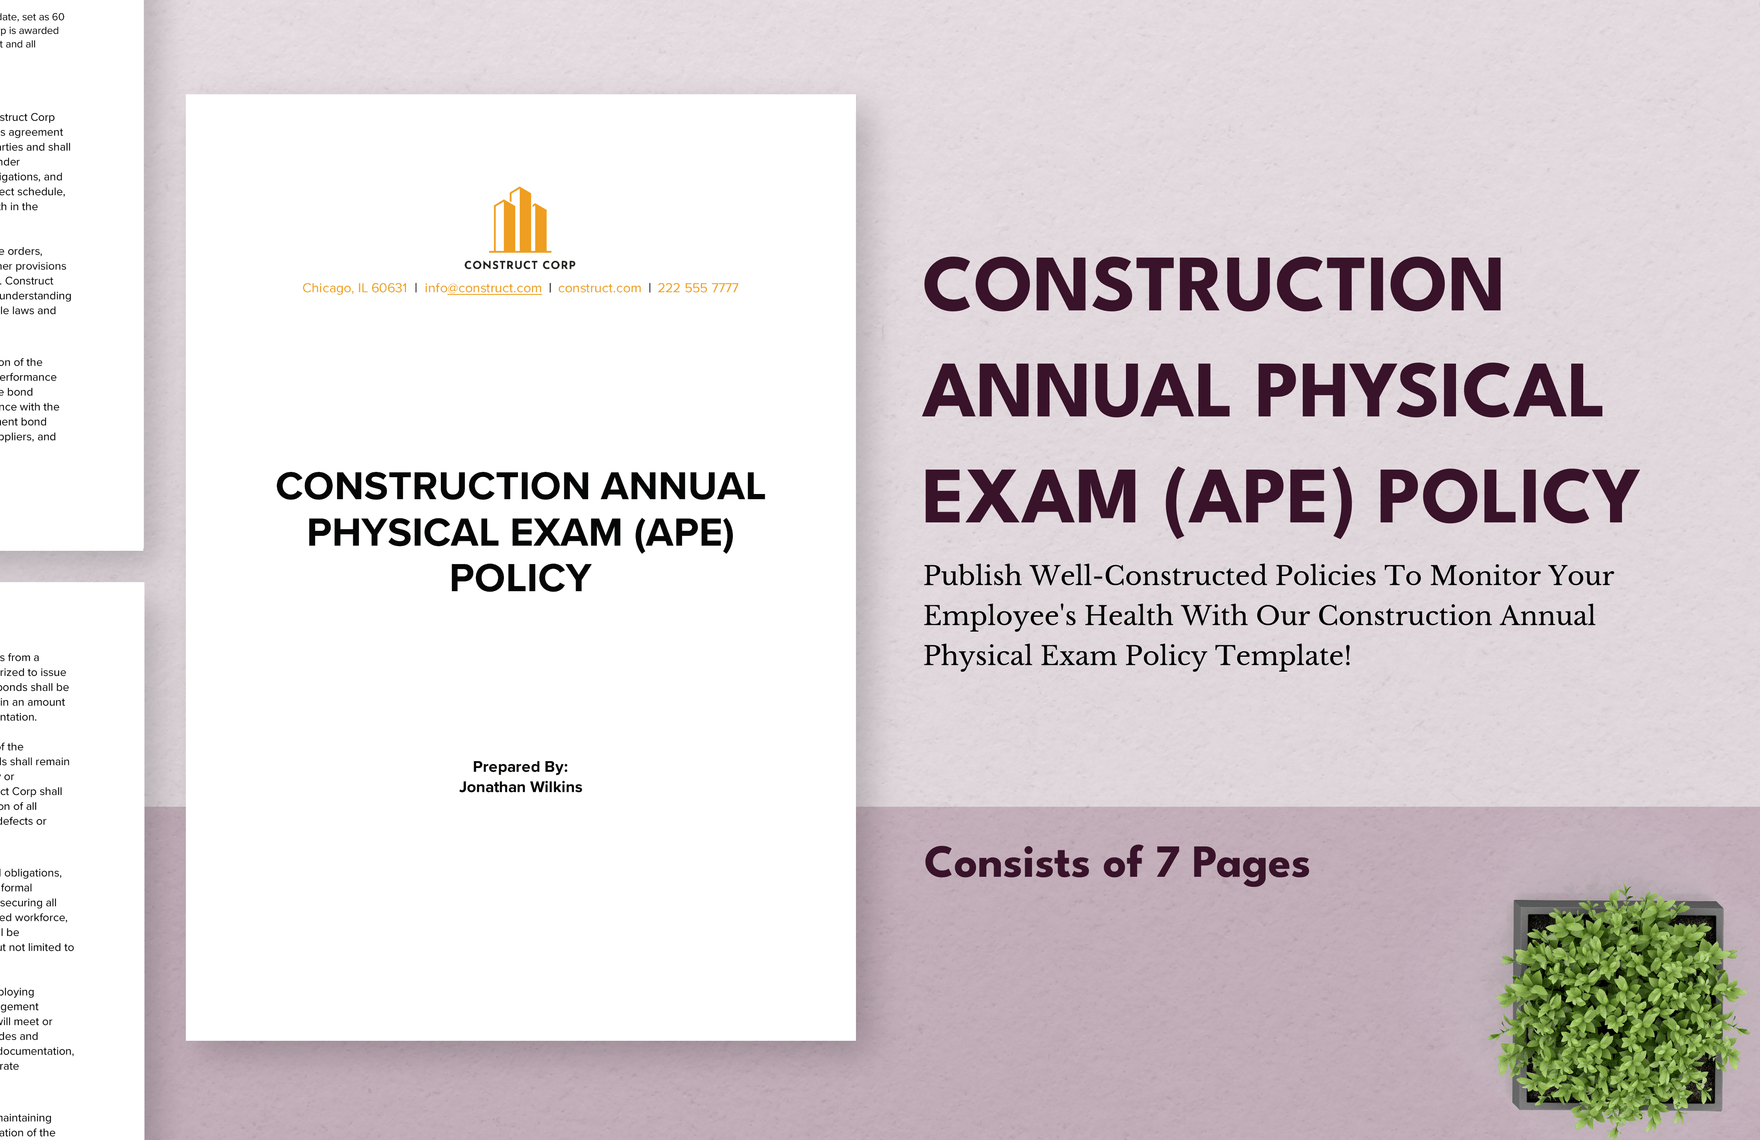 Construction Annual Physical Exam (APE) Policy Template